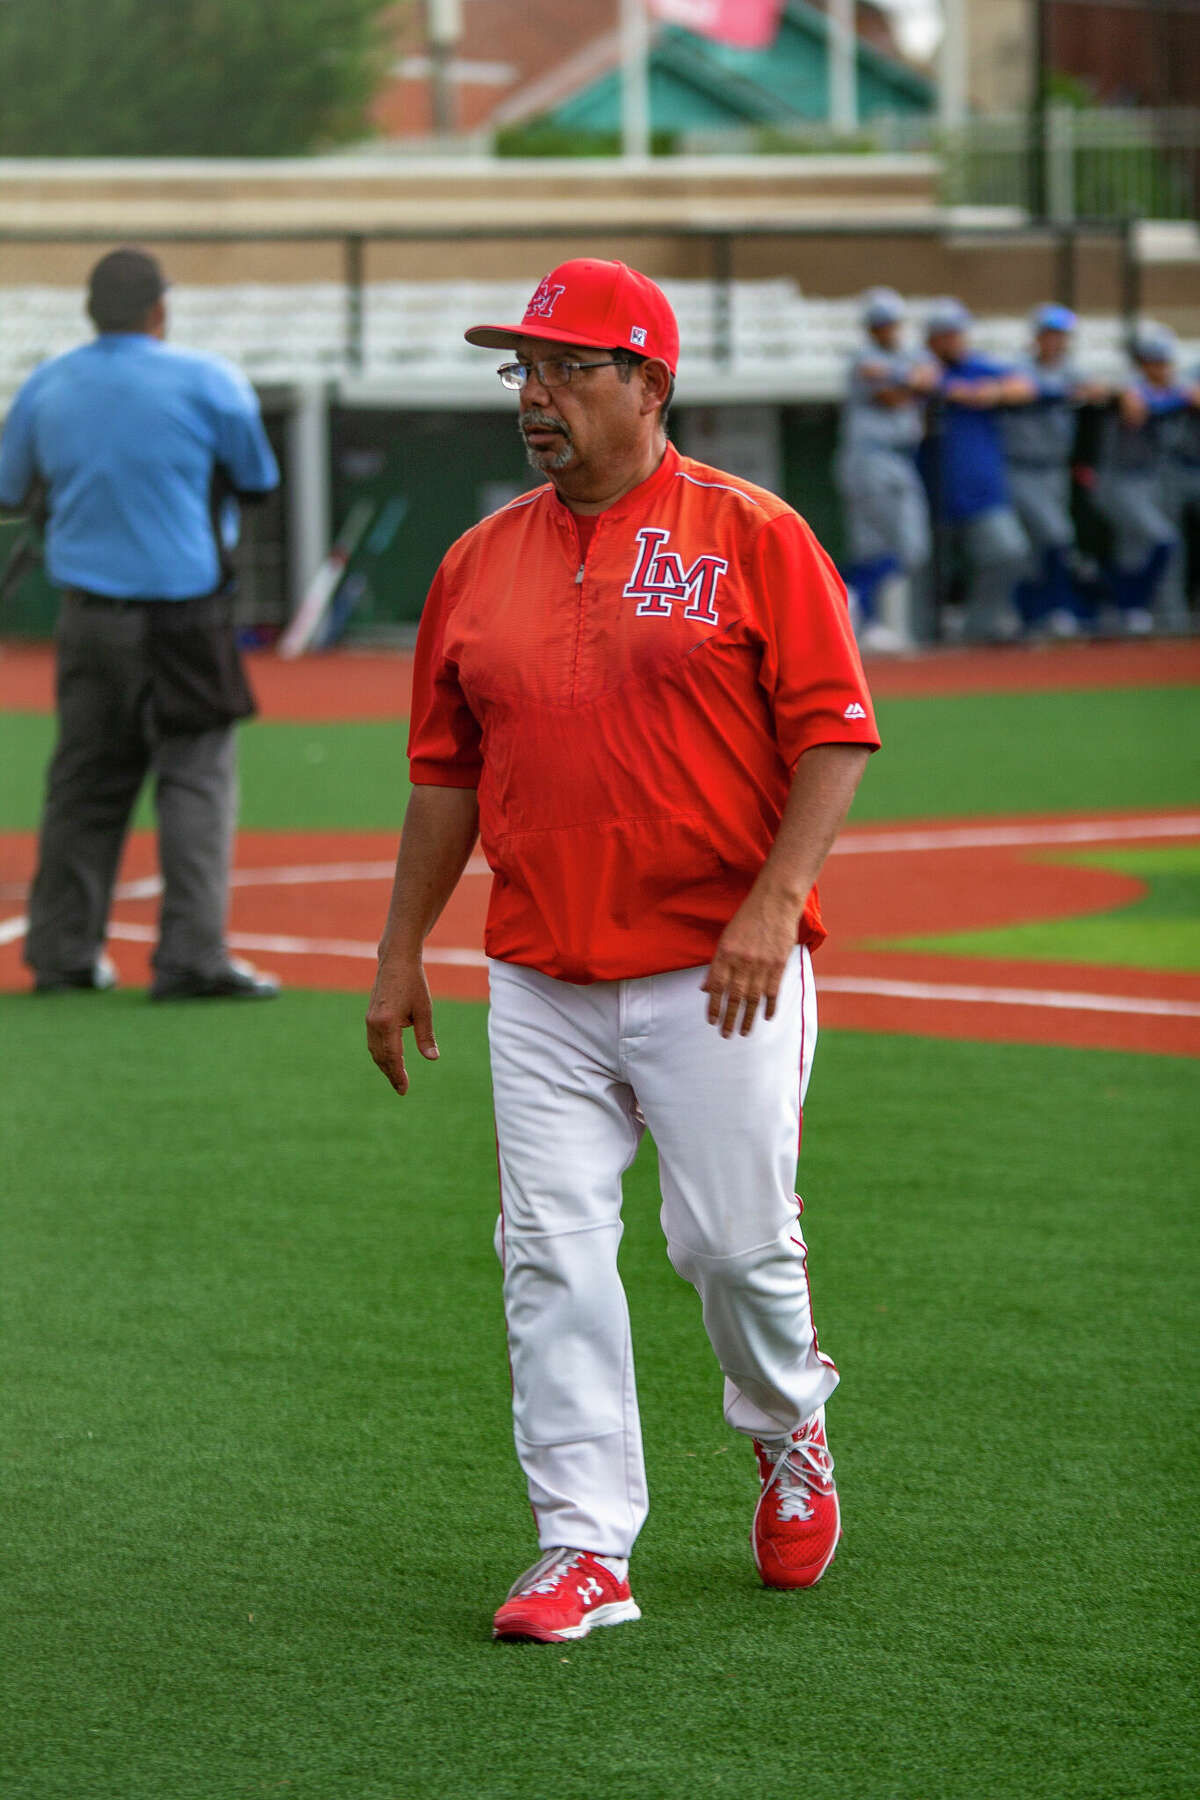 Martin head baseball coach Jorge Tijerina has decided to retire after leading the Tigers for the past 24 seasons.